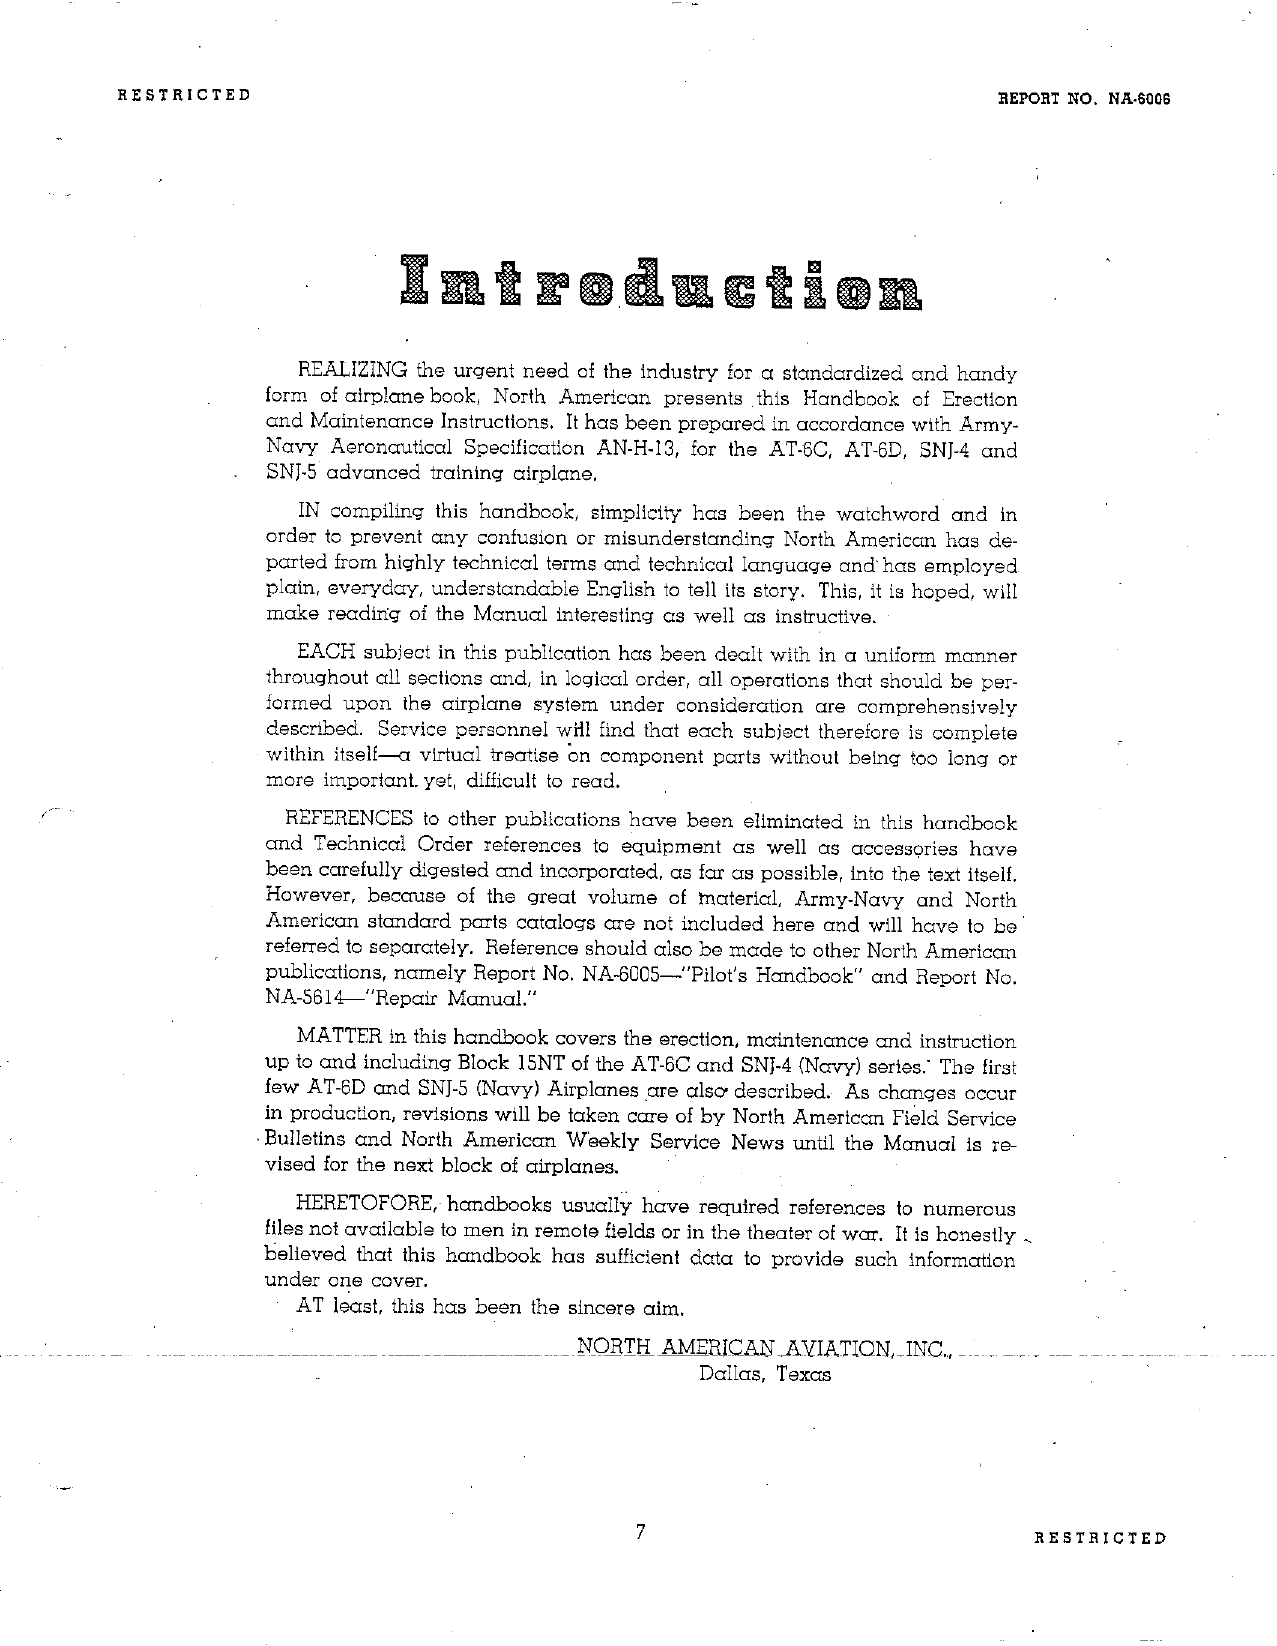 Sample page 7 from AirCorps Library document: The Texan: Service Manual